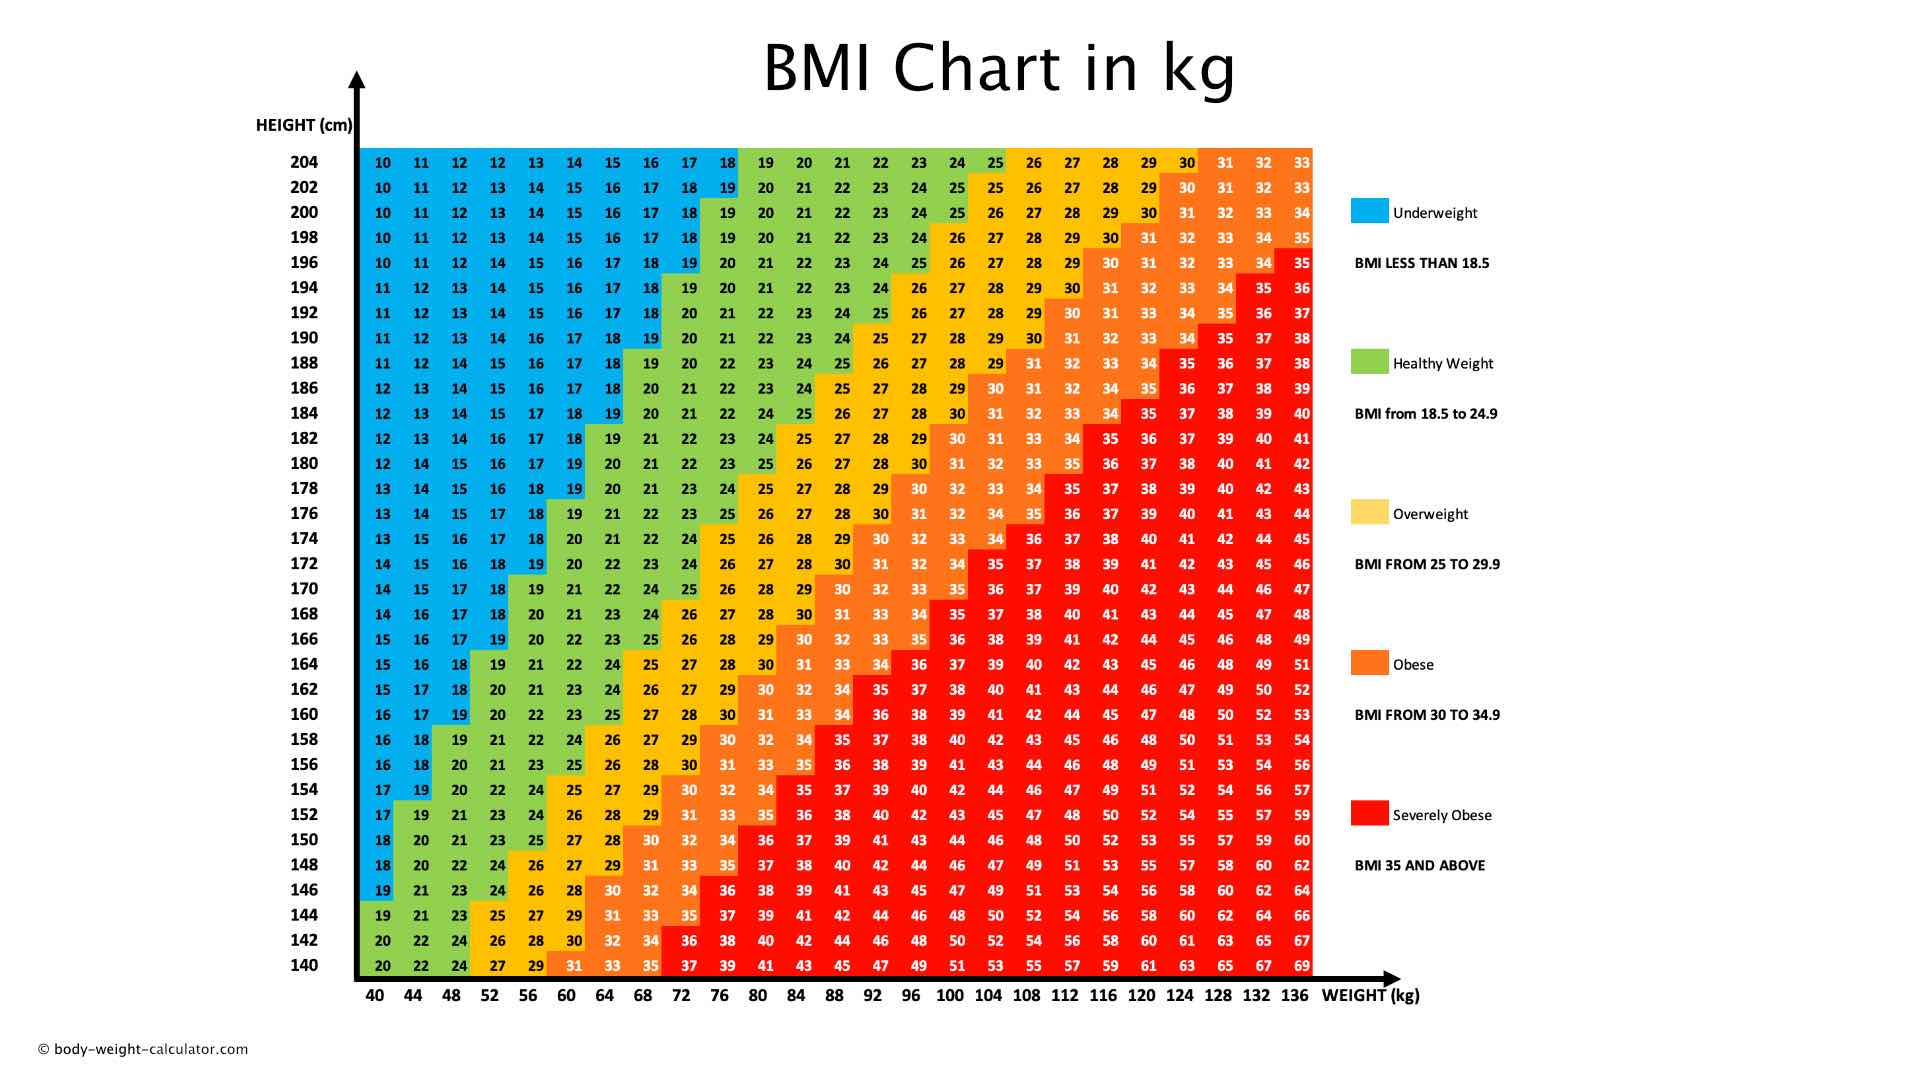 BMI chart for males by age in South Africa - 2022